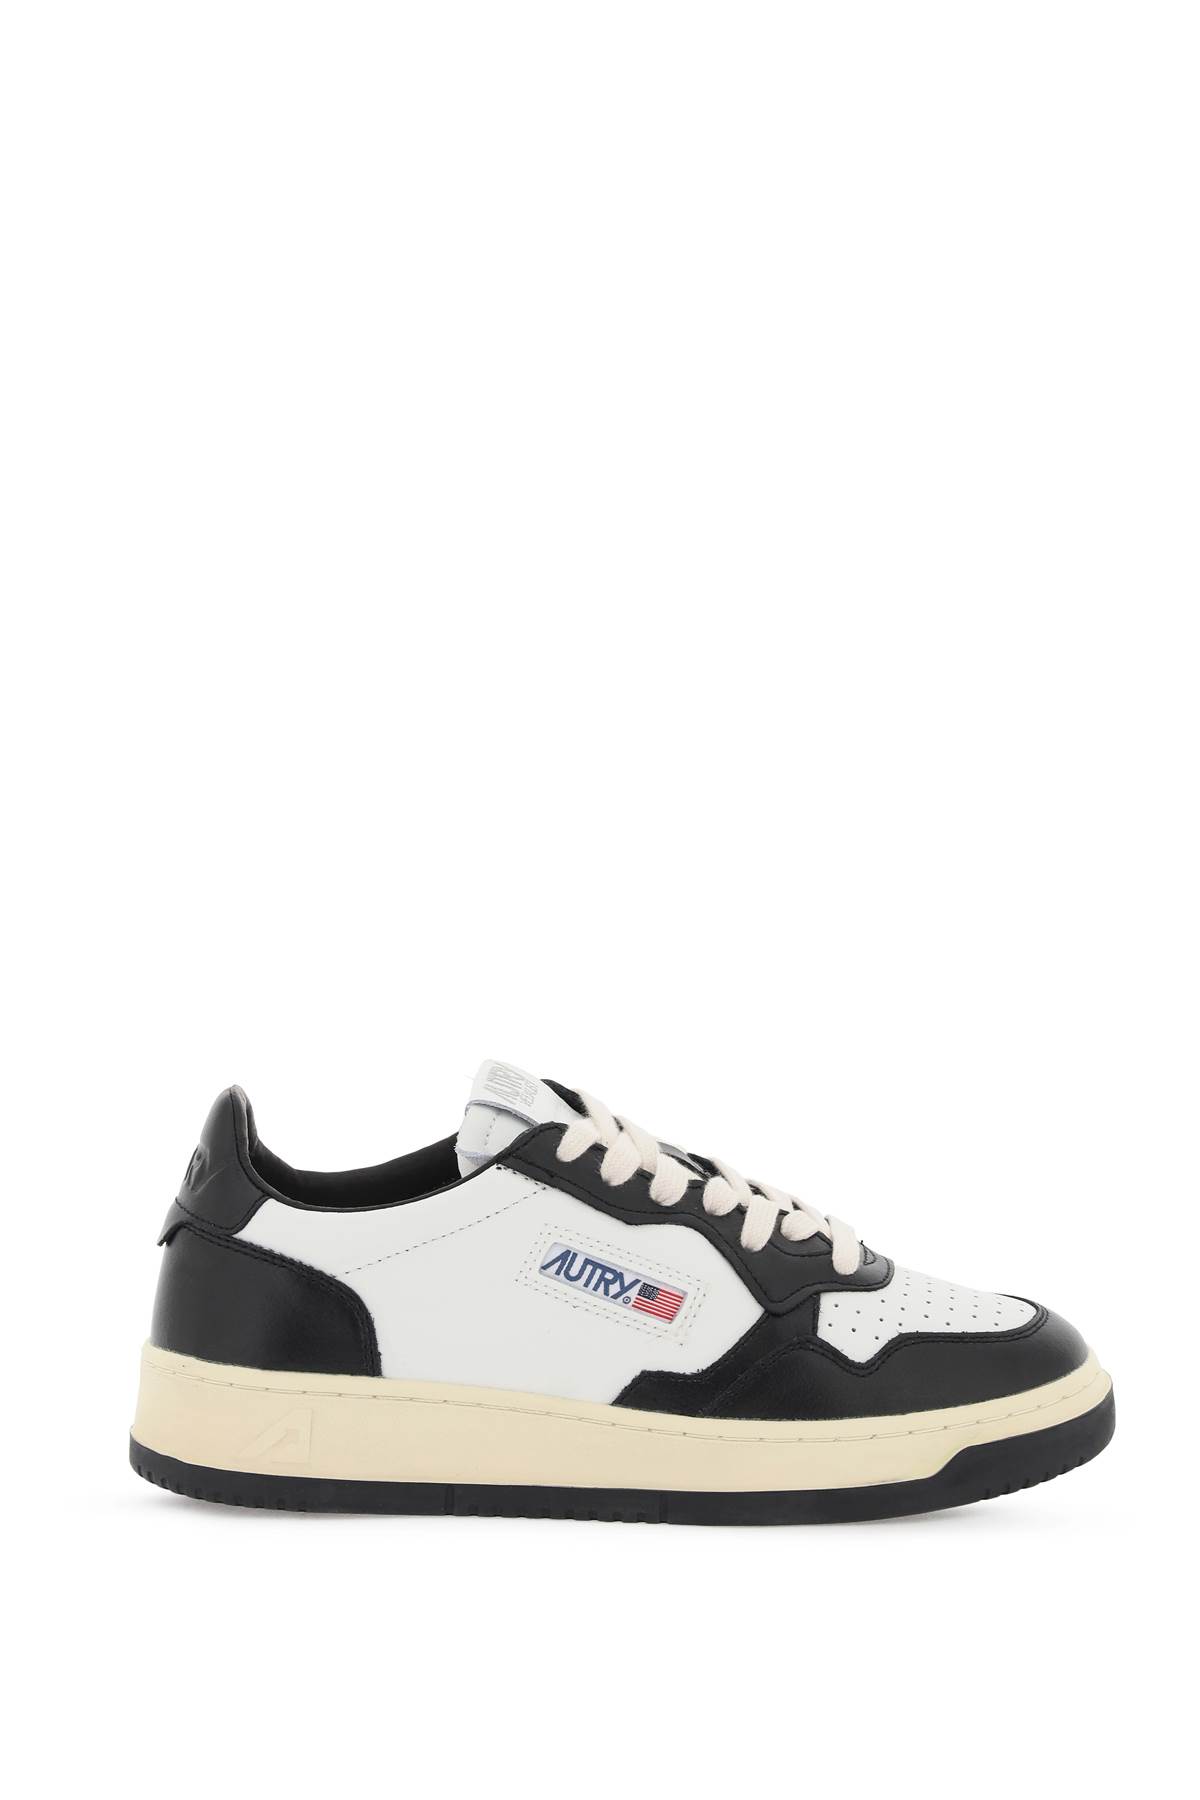 Shop Autry Medalist Low Sneakers In White Black (white)